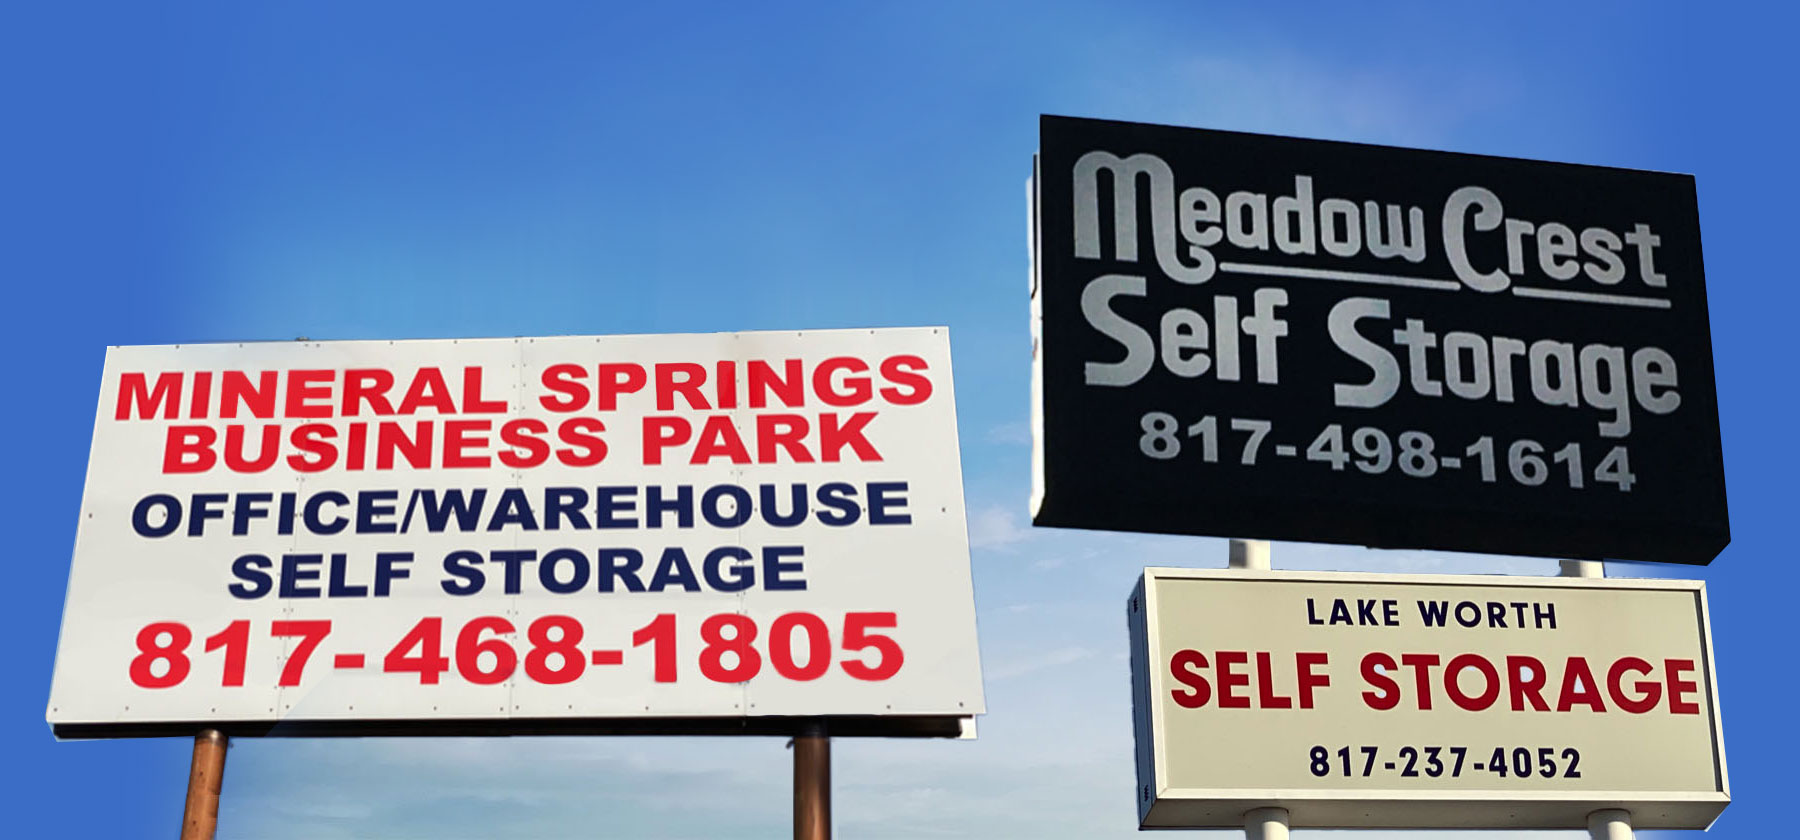 self-storage facilities sign collage